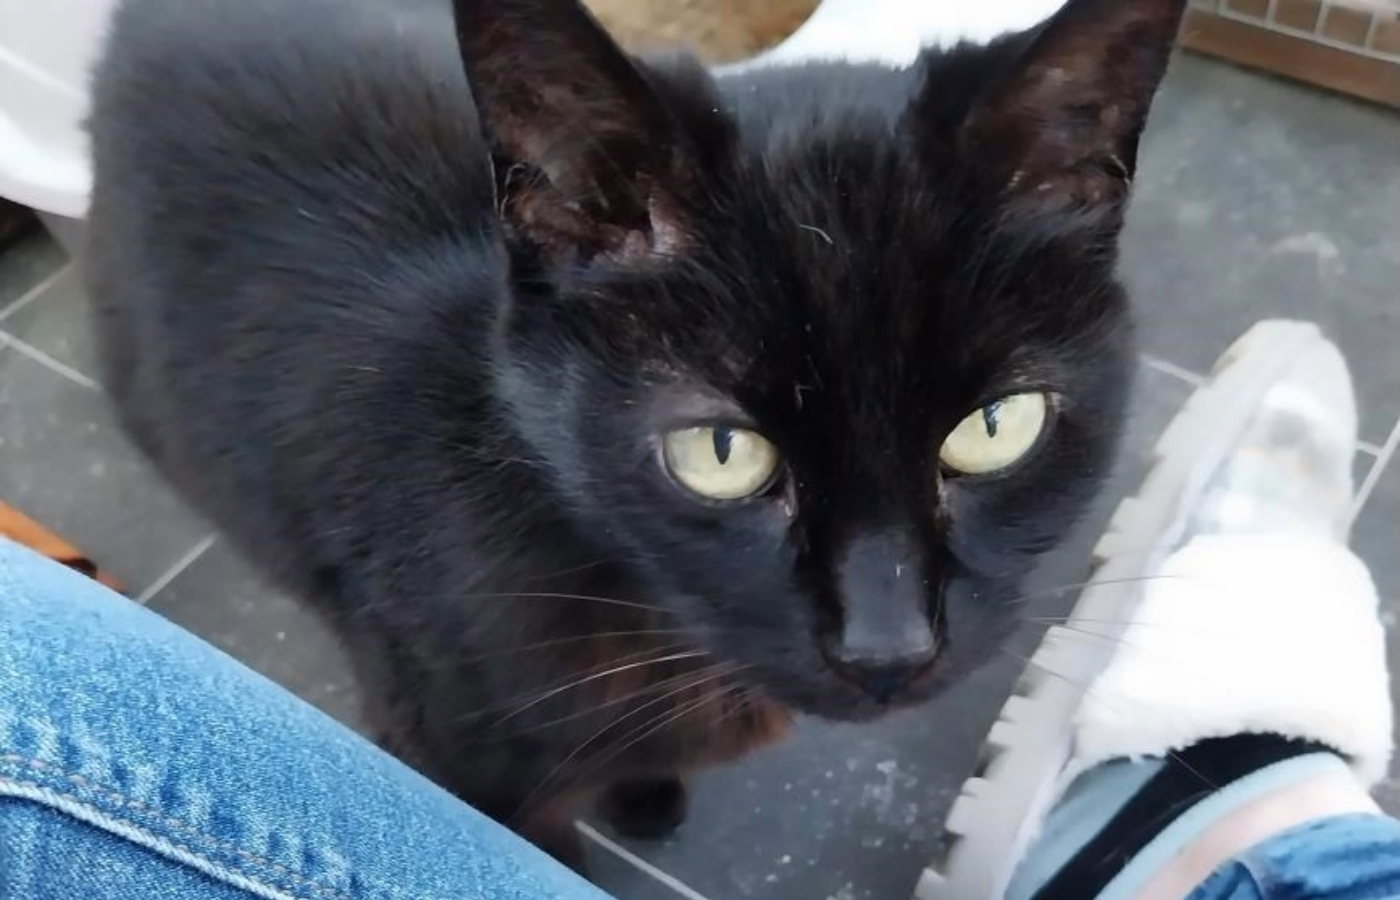 LV, the 20-year-old black cat, is around 96 years old in cat years.